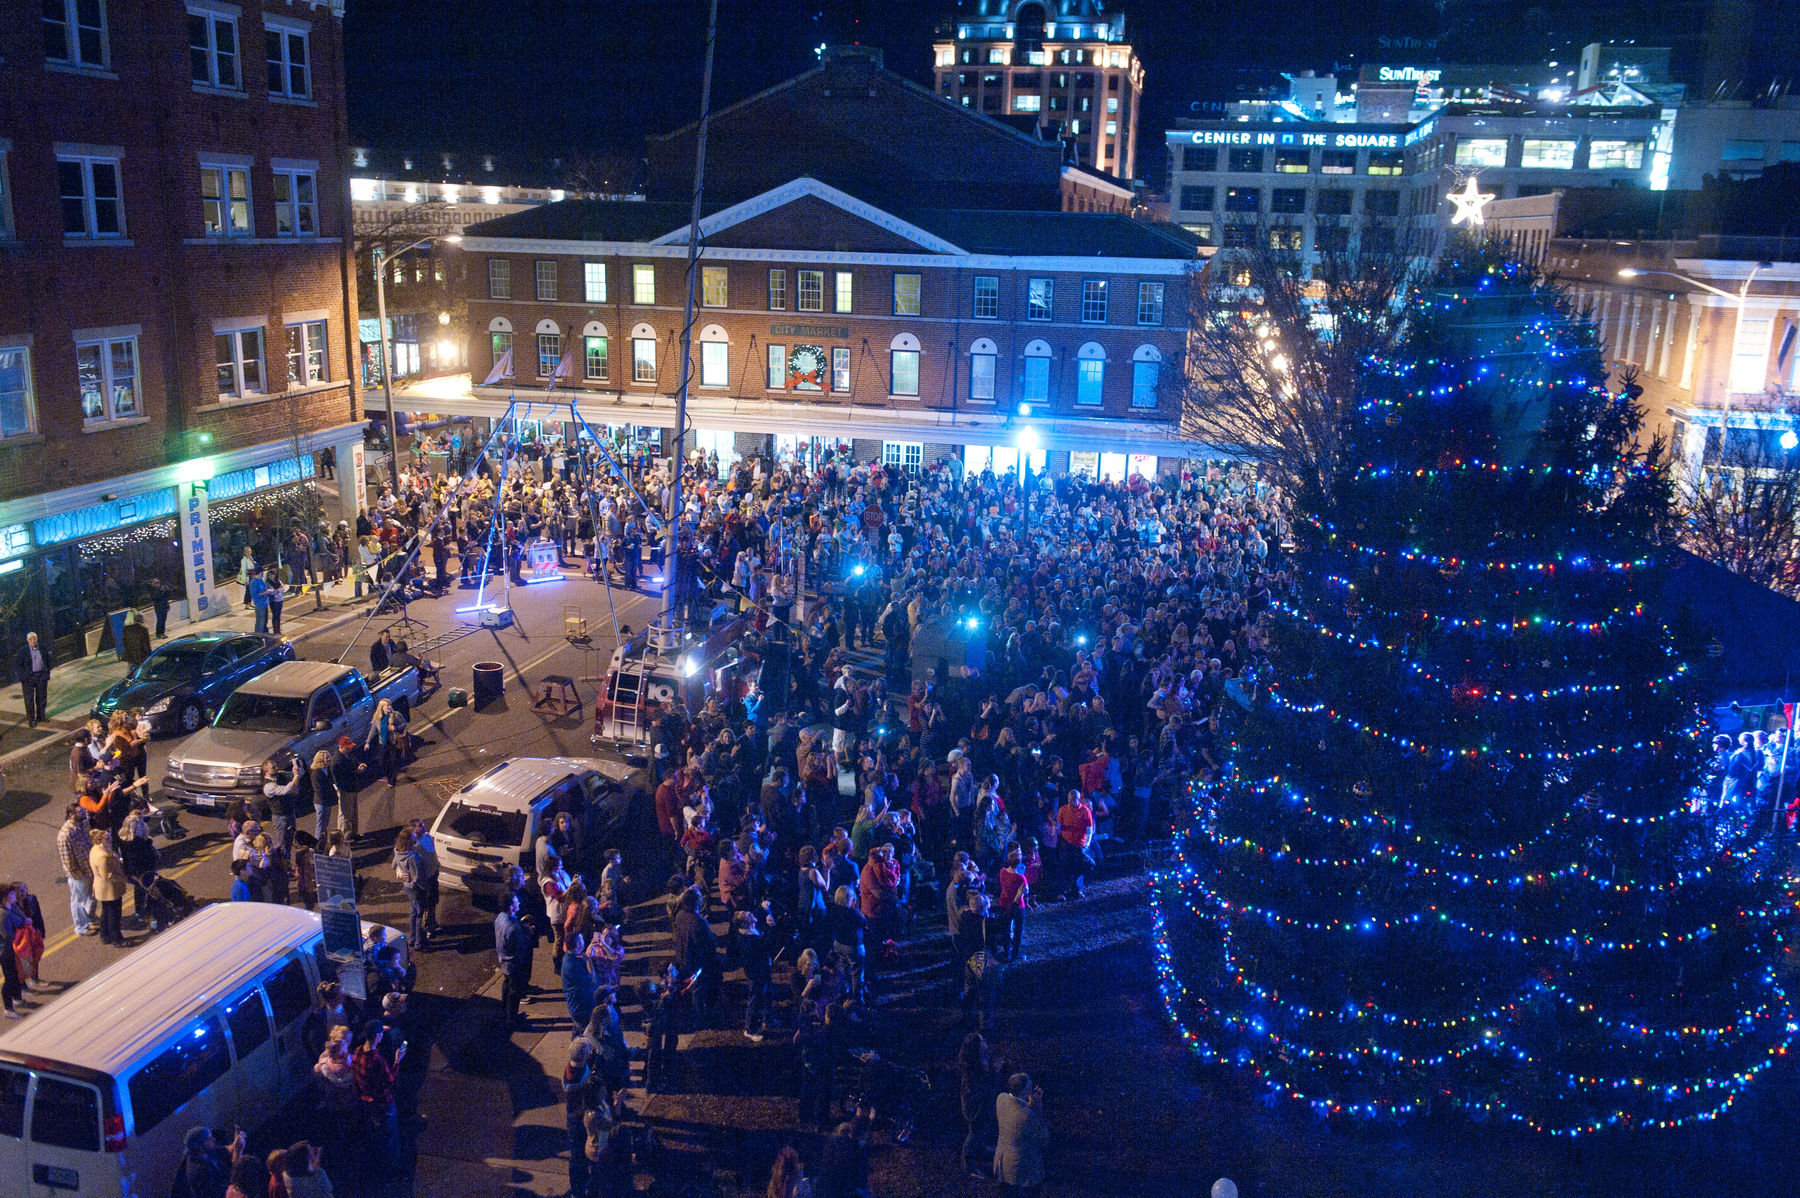 Dickens of a Christmas First Night Downtown Roanoke